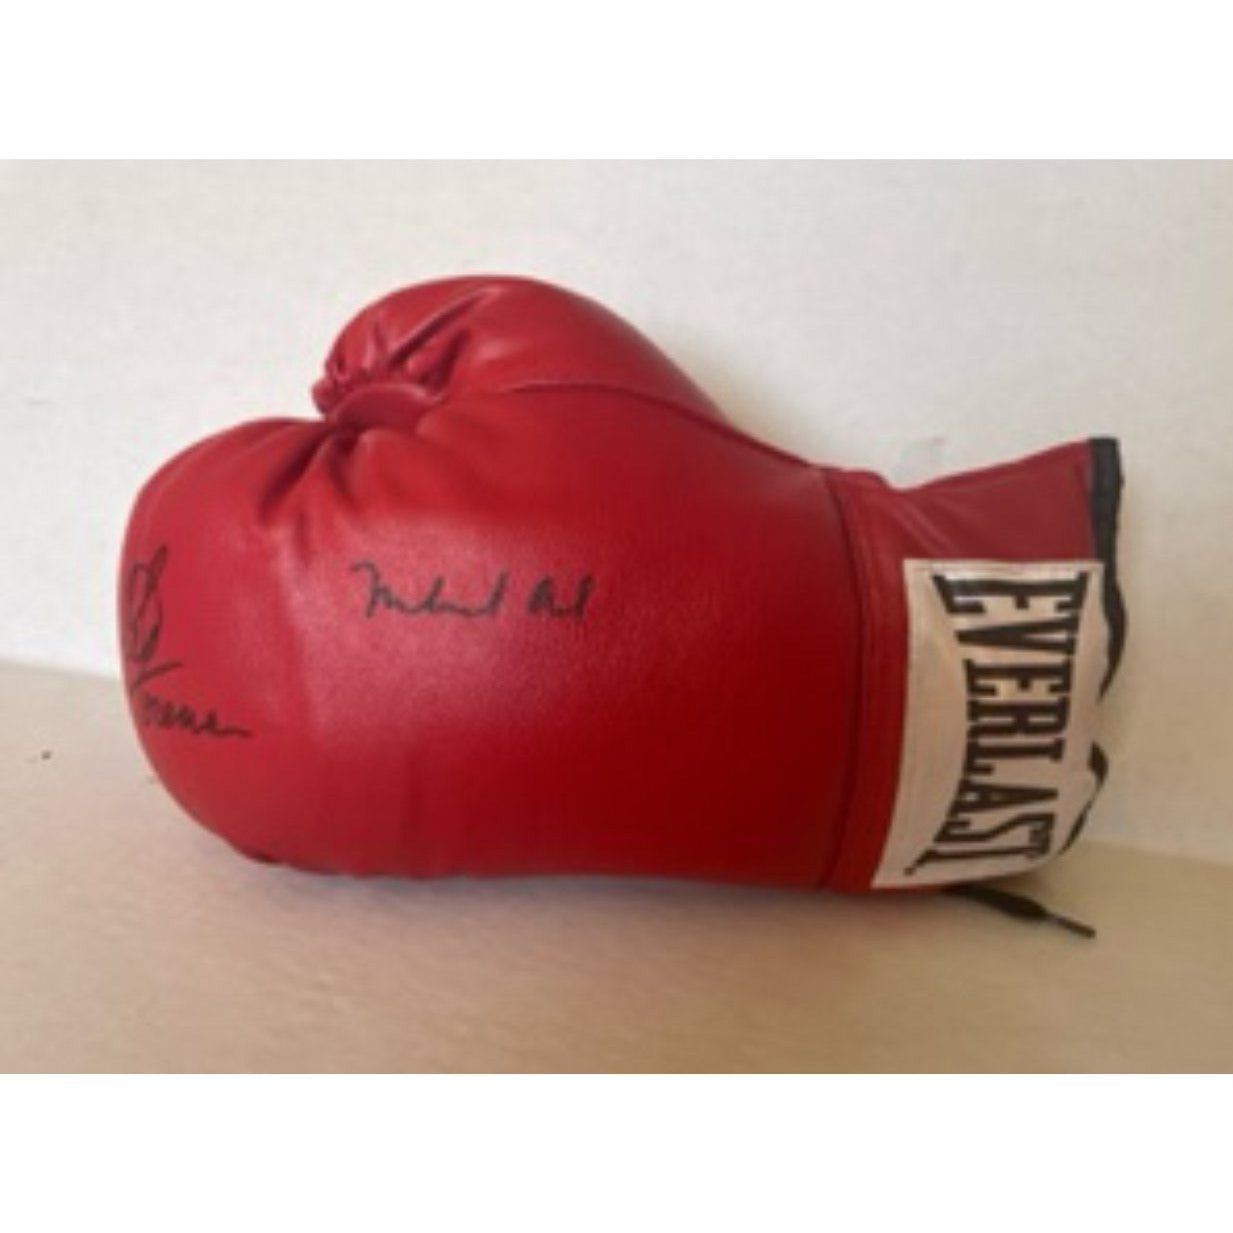 Ali George Foreman leather Everlast boxing gloves signed – Awesome Artifacts